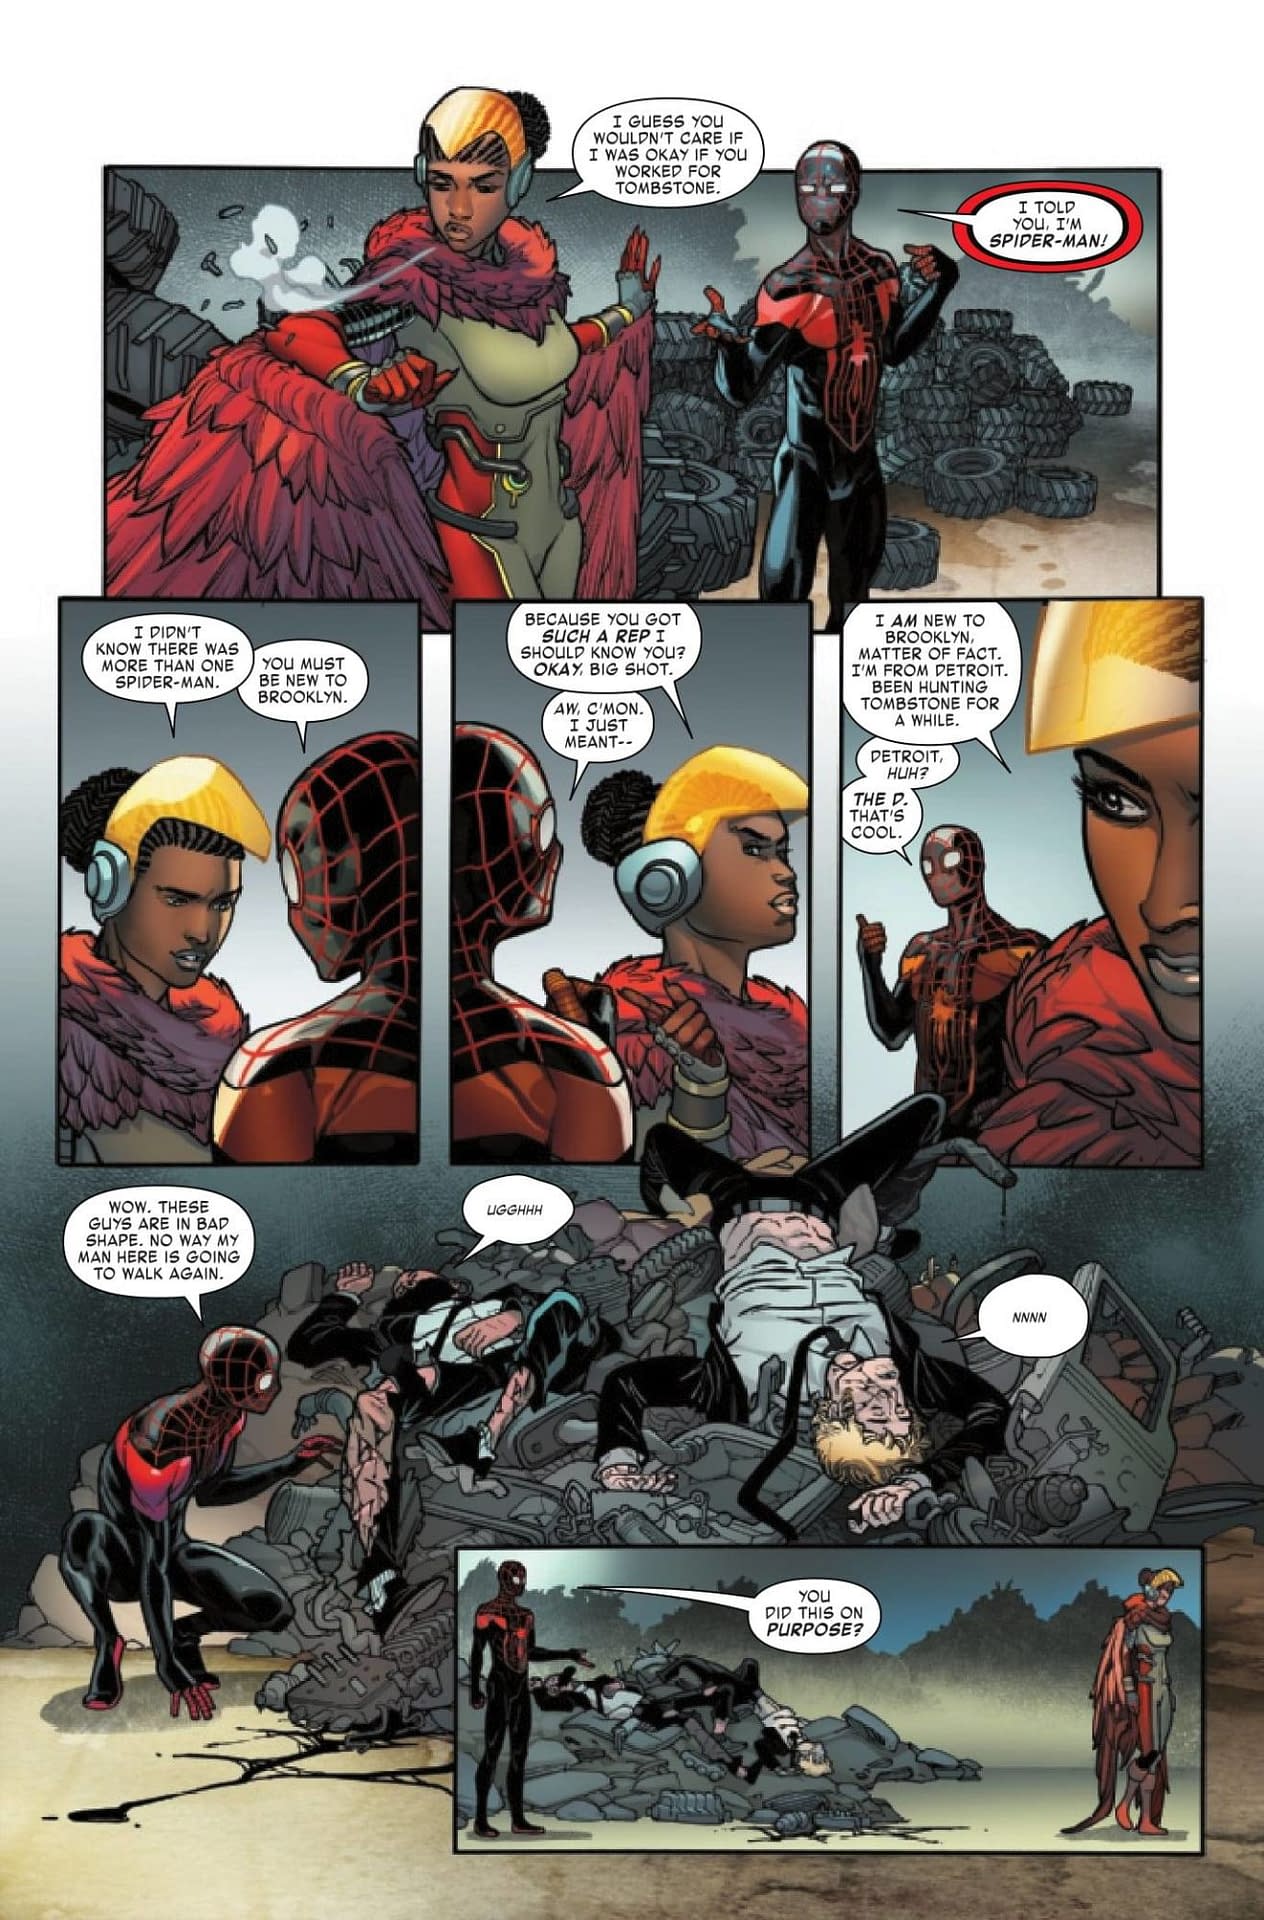 Love is in the Air in Miles Morales: Spider-Man #6